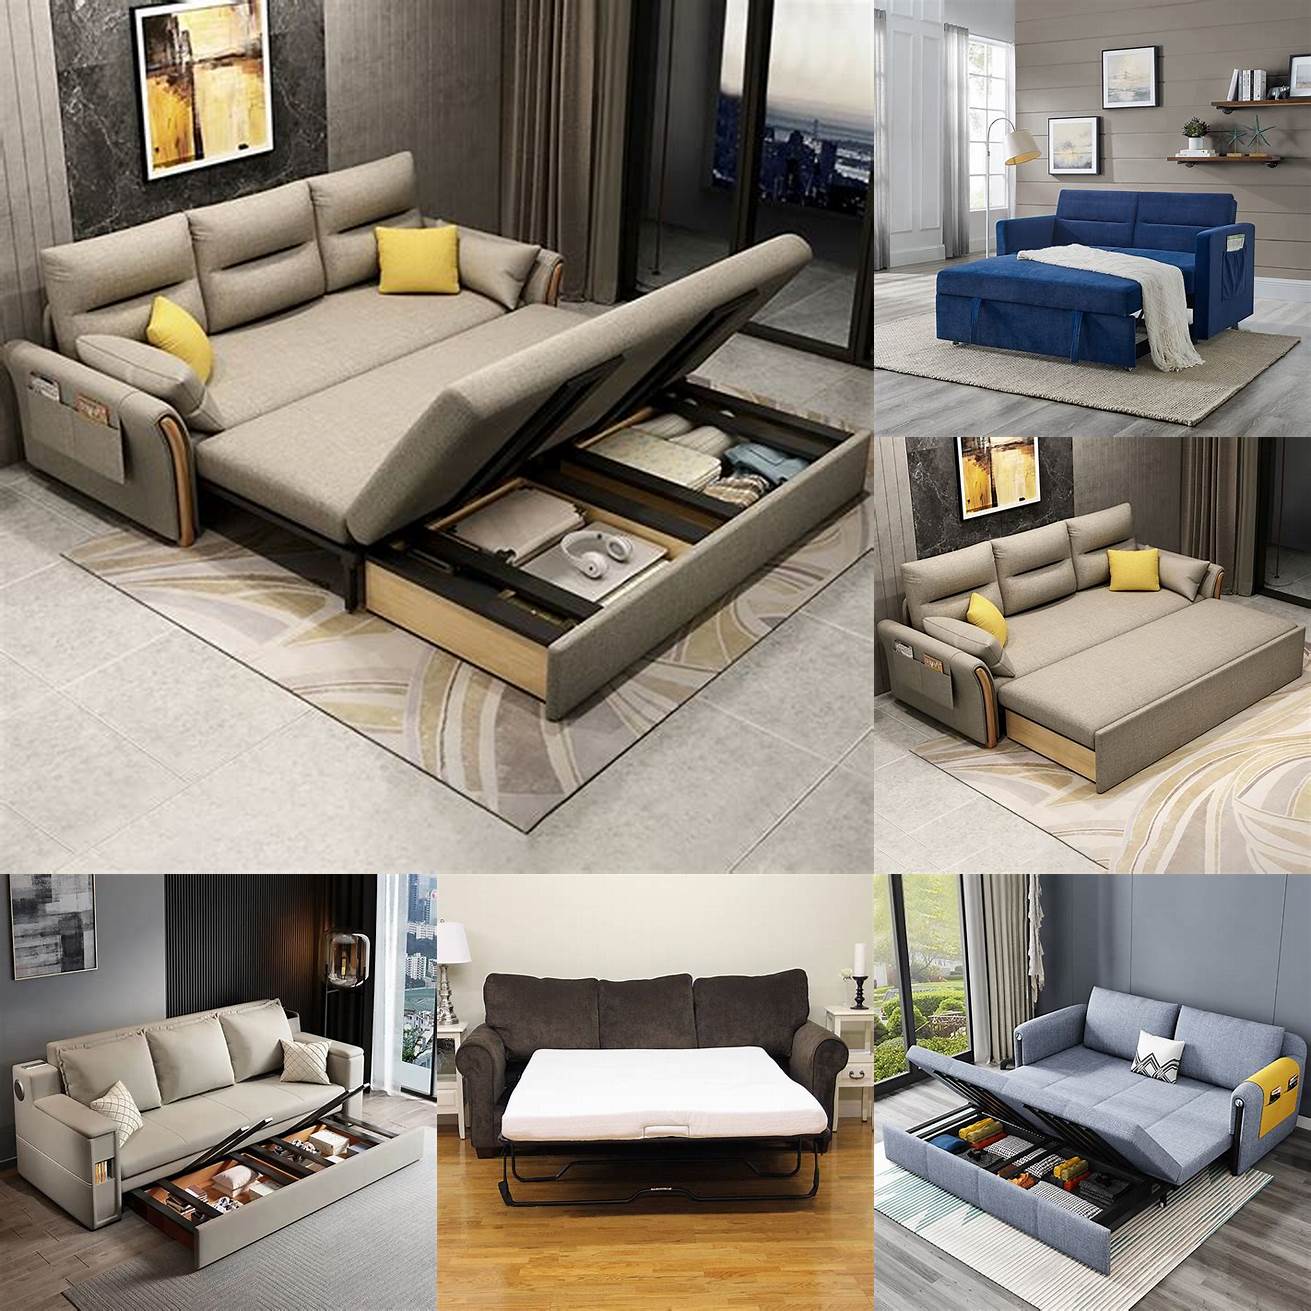 Convenient Full Sleeper Sofas are easy to use